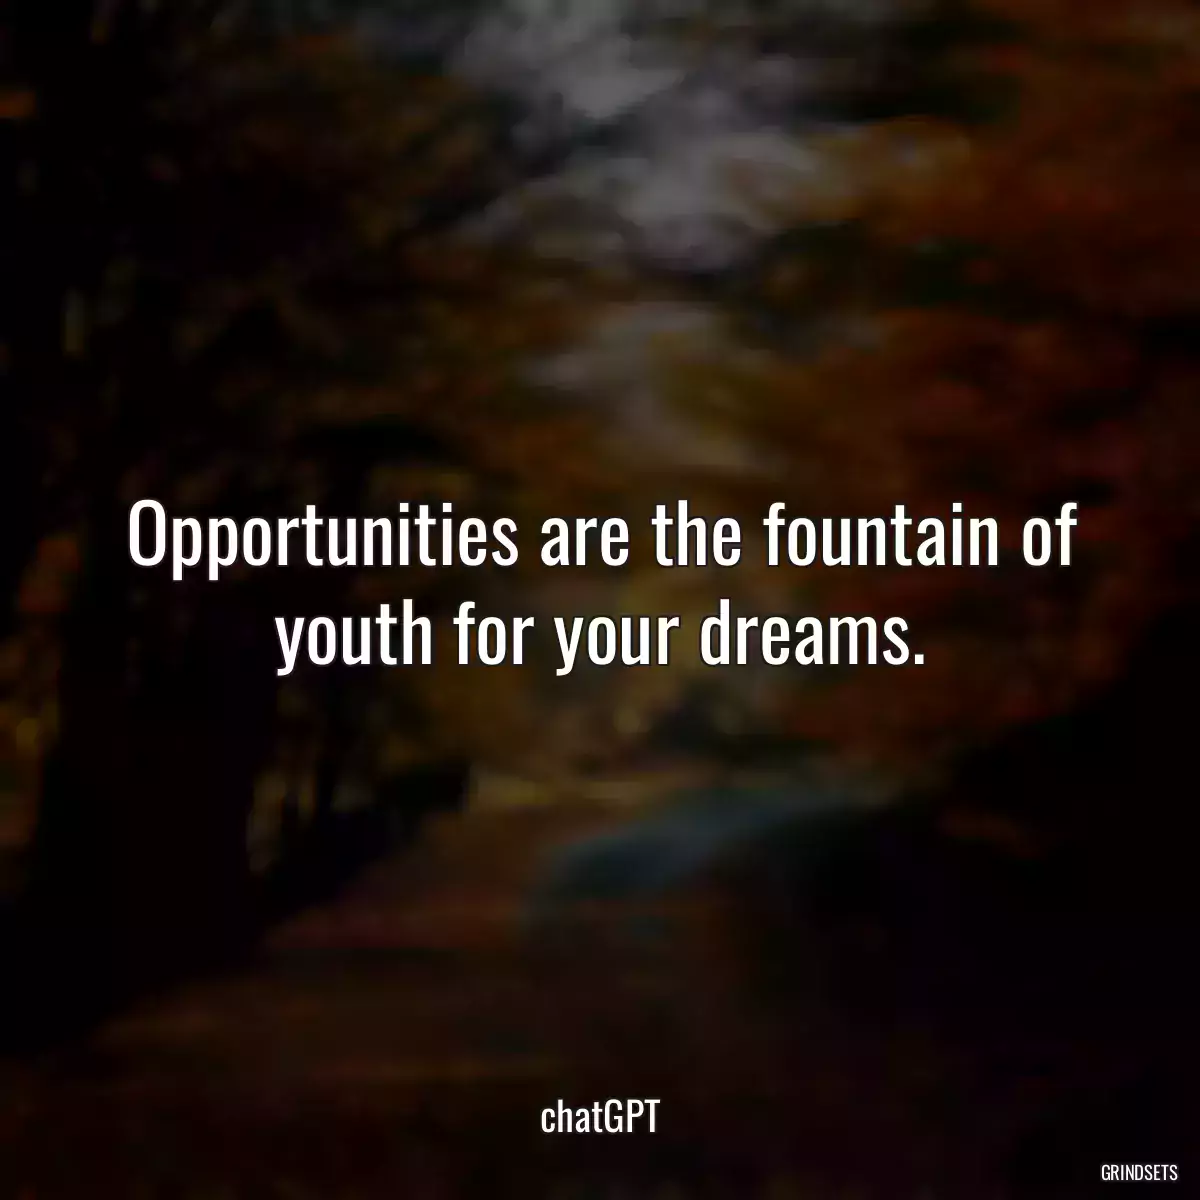 Opportunities are the fountain of youth for your dreams.